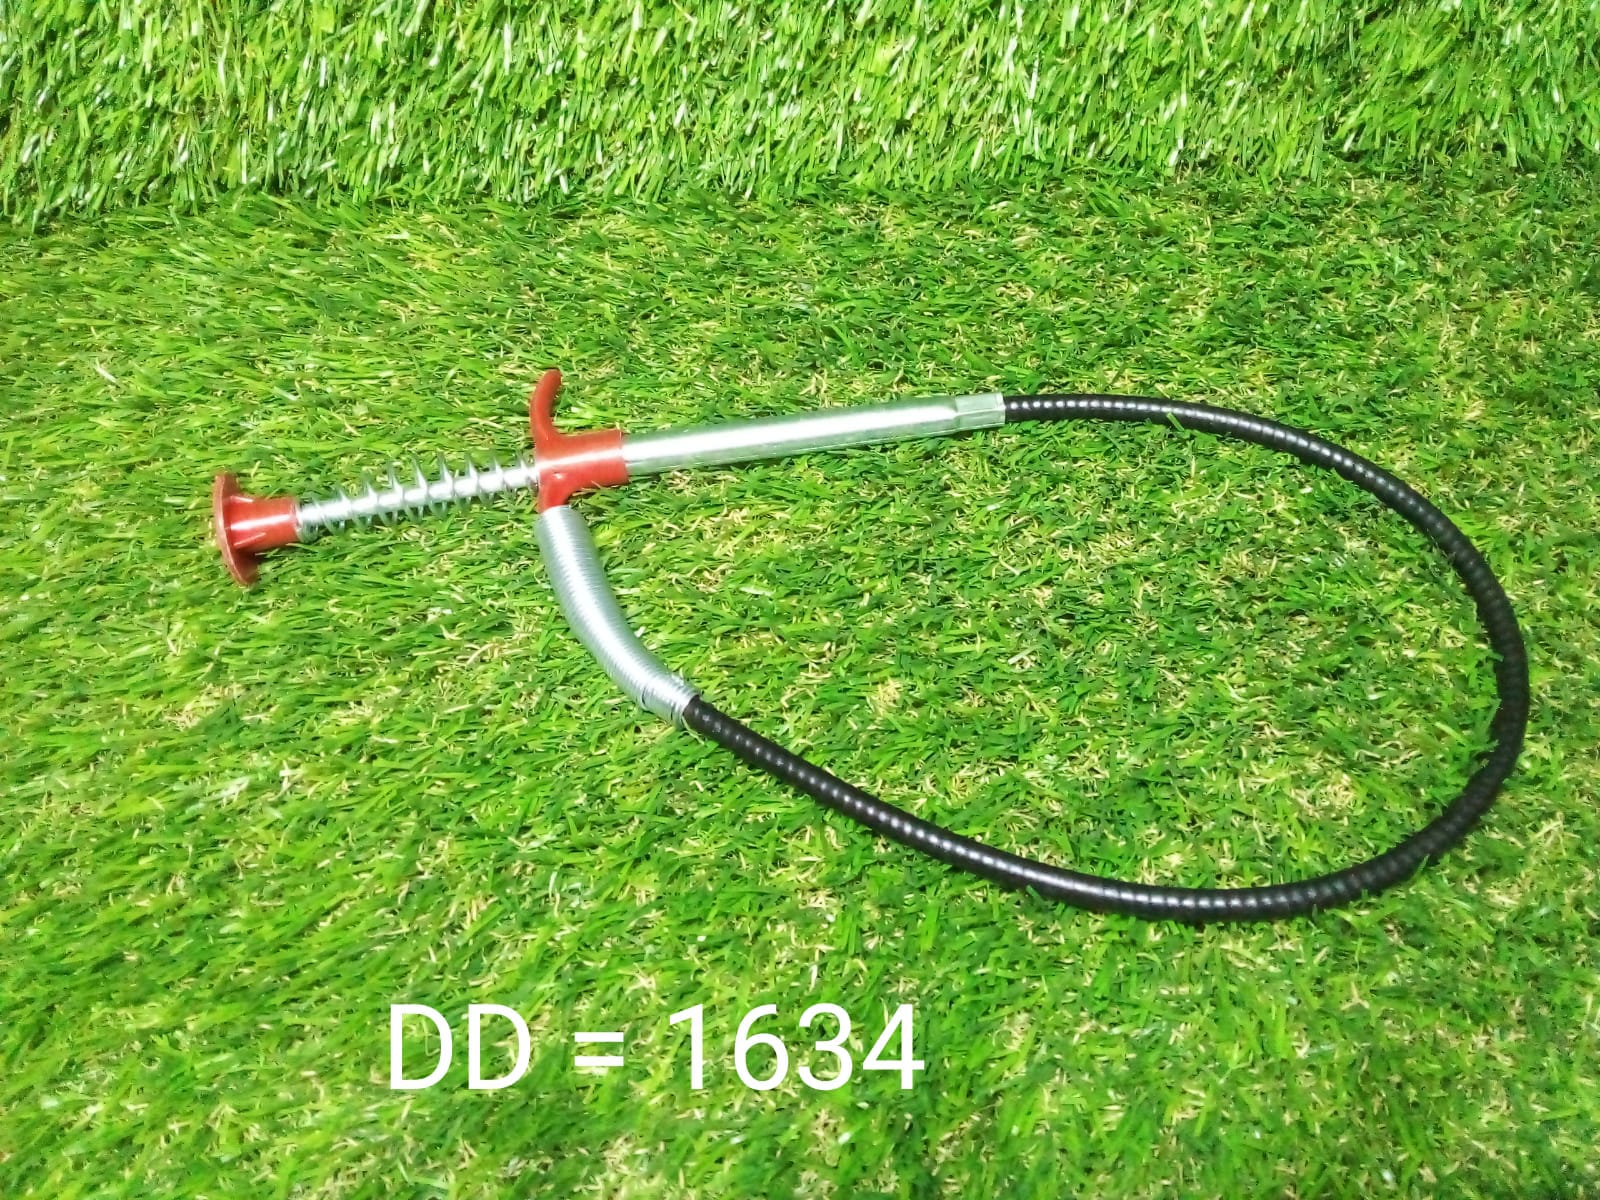 1634 Metal Wire Brush Sink Cleaning Hook Sewer Dredging Device DeoDap